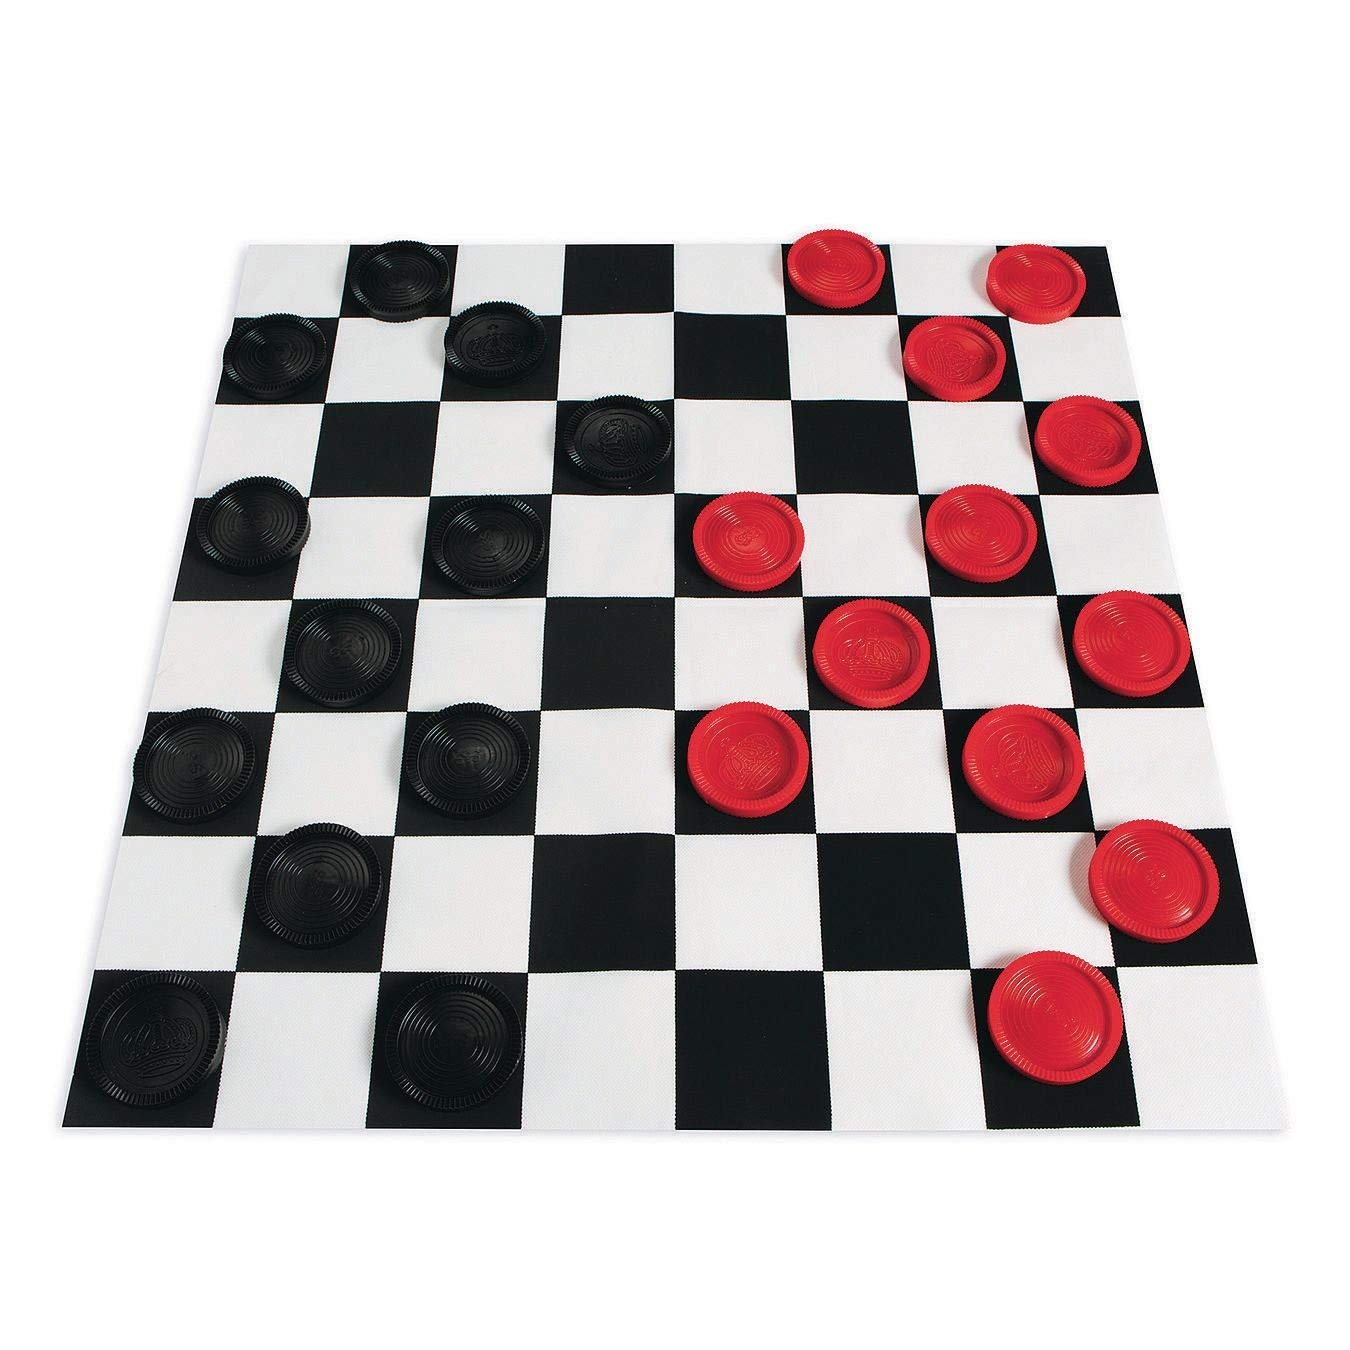 S&S Worldwide Giant 2-in-1 Four in a Row & Checkers Game